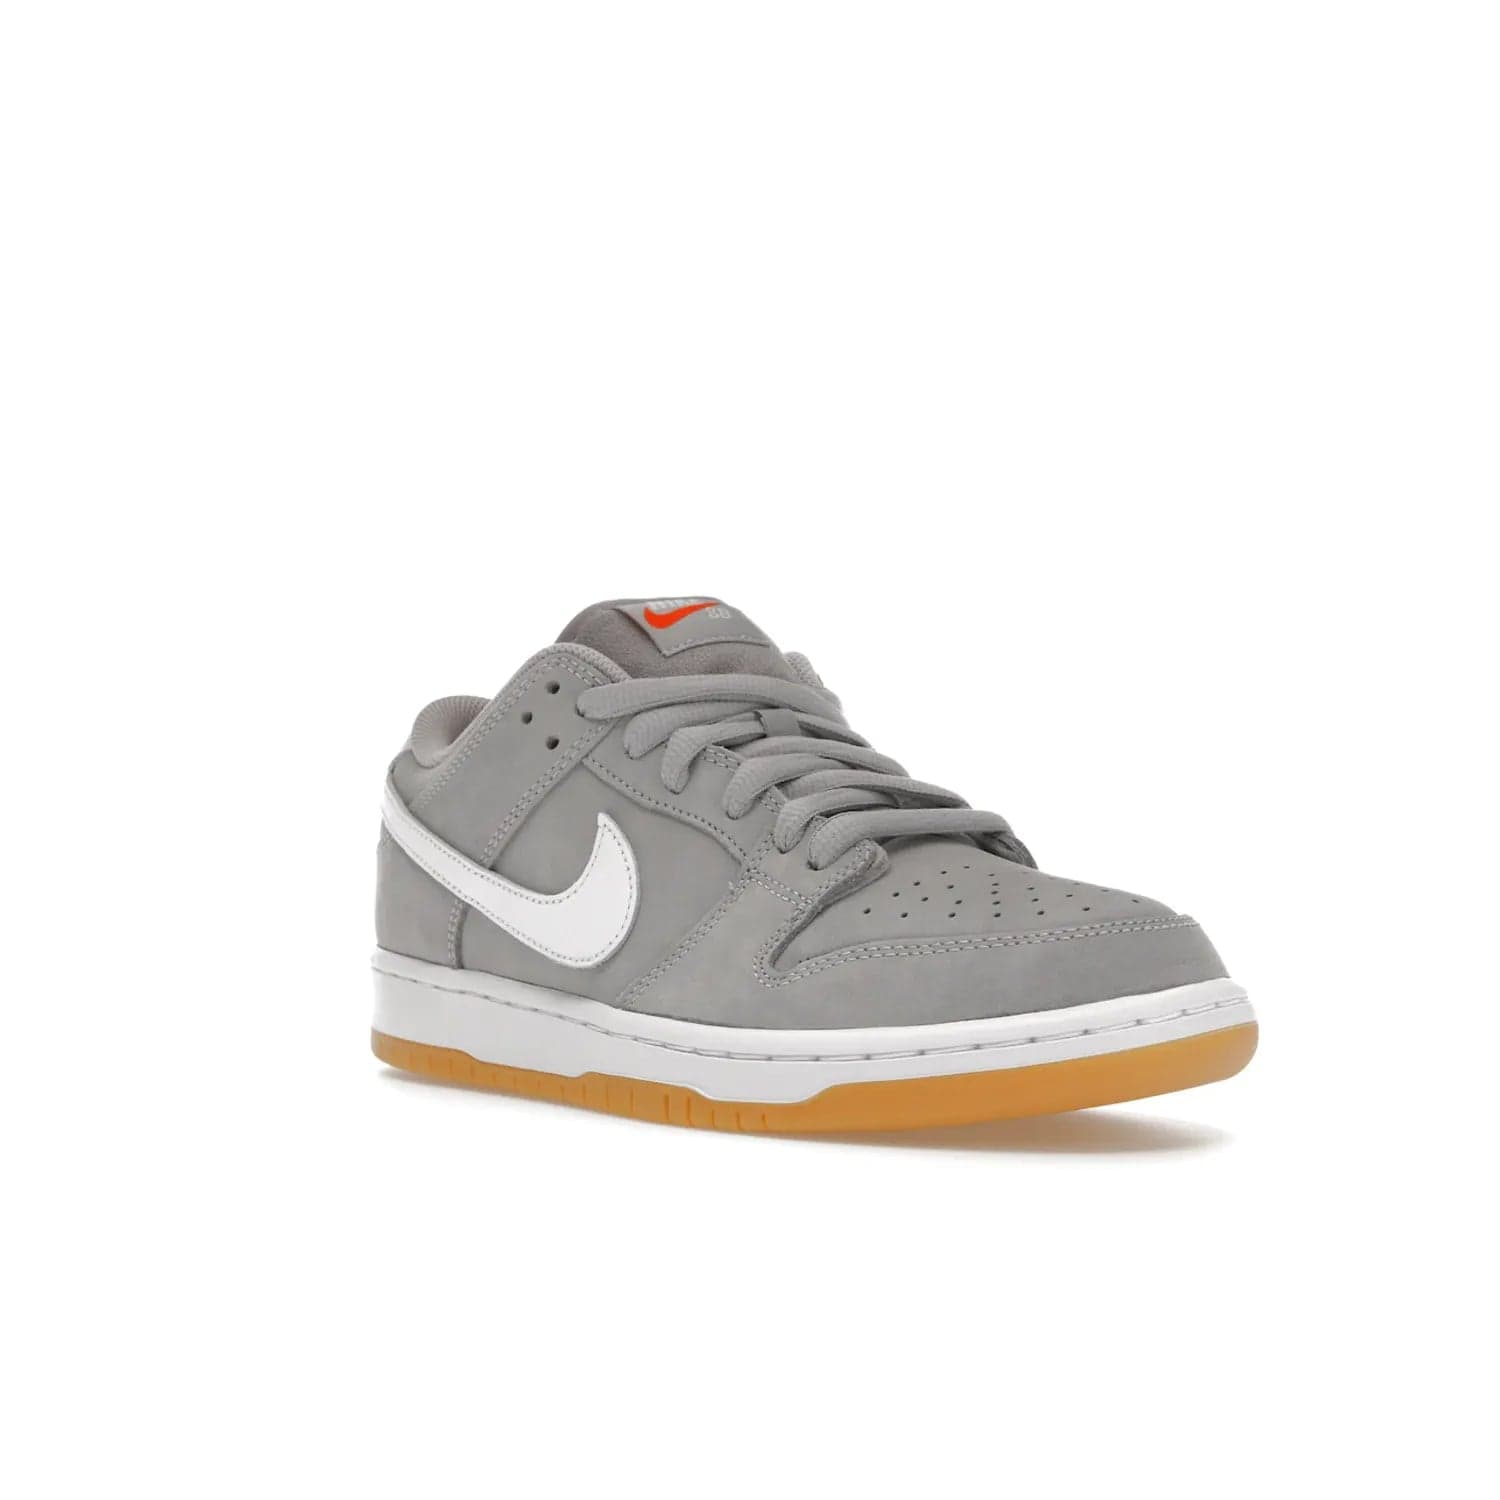 Nike SB Dunk Low Pro ISO Orange Label Wolf Grey Gum - Image 6 - Only at www.BallersClubKickz.com - Introducing Nike's SB Dunk Low Pro ISO Orange Label Wolf Grey Gum - a stylish shoe with a premium Wolf Grey upper, white leather Nike Swoosh, and an eye-catching gum outsole. With special Nike branding and packaging, this shoe adds a unique fashion statement. Out Feb. 24, 2023.